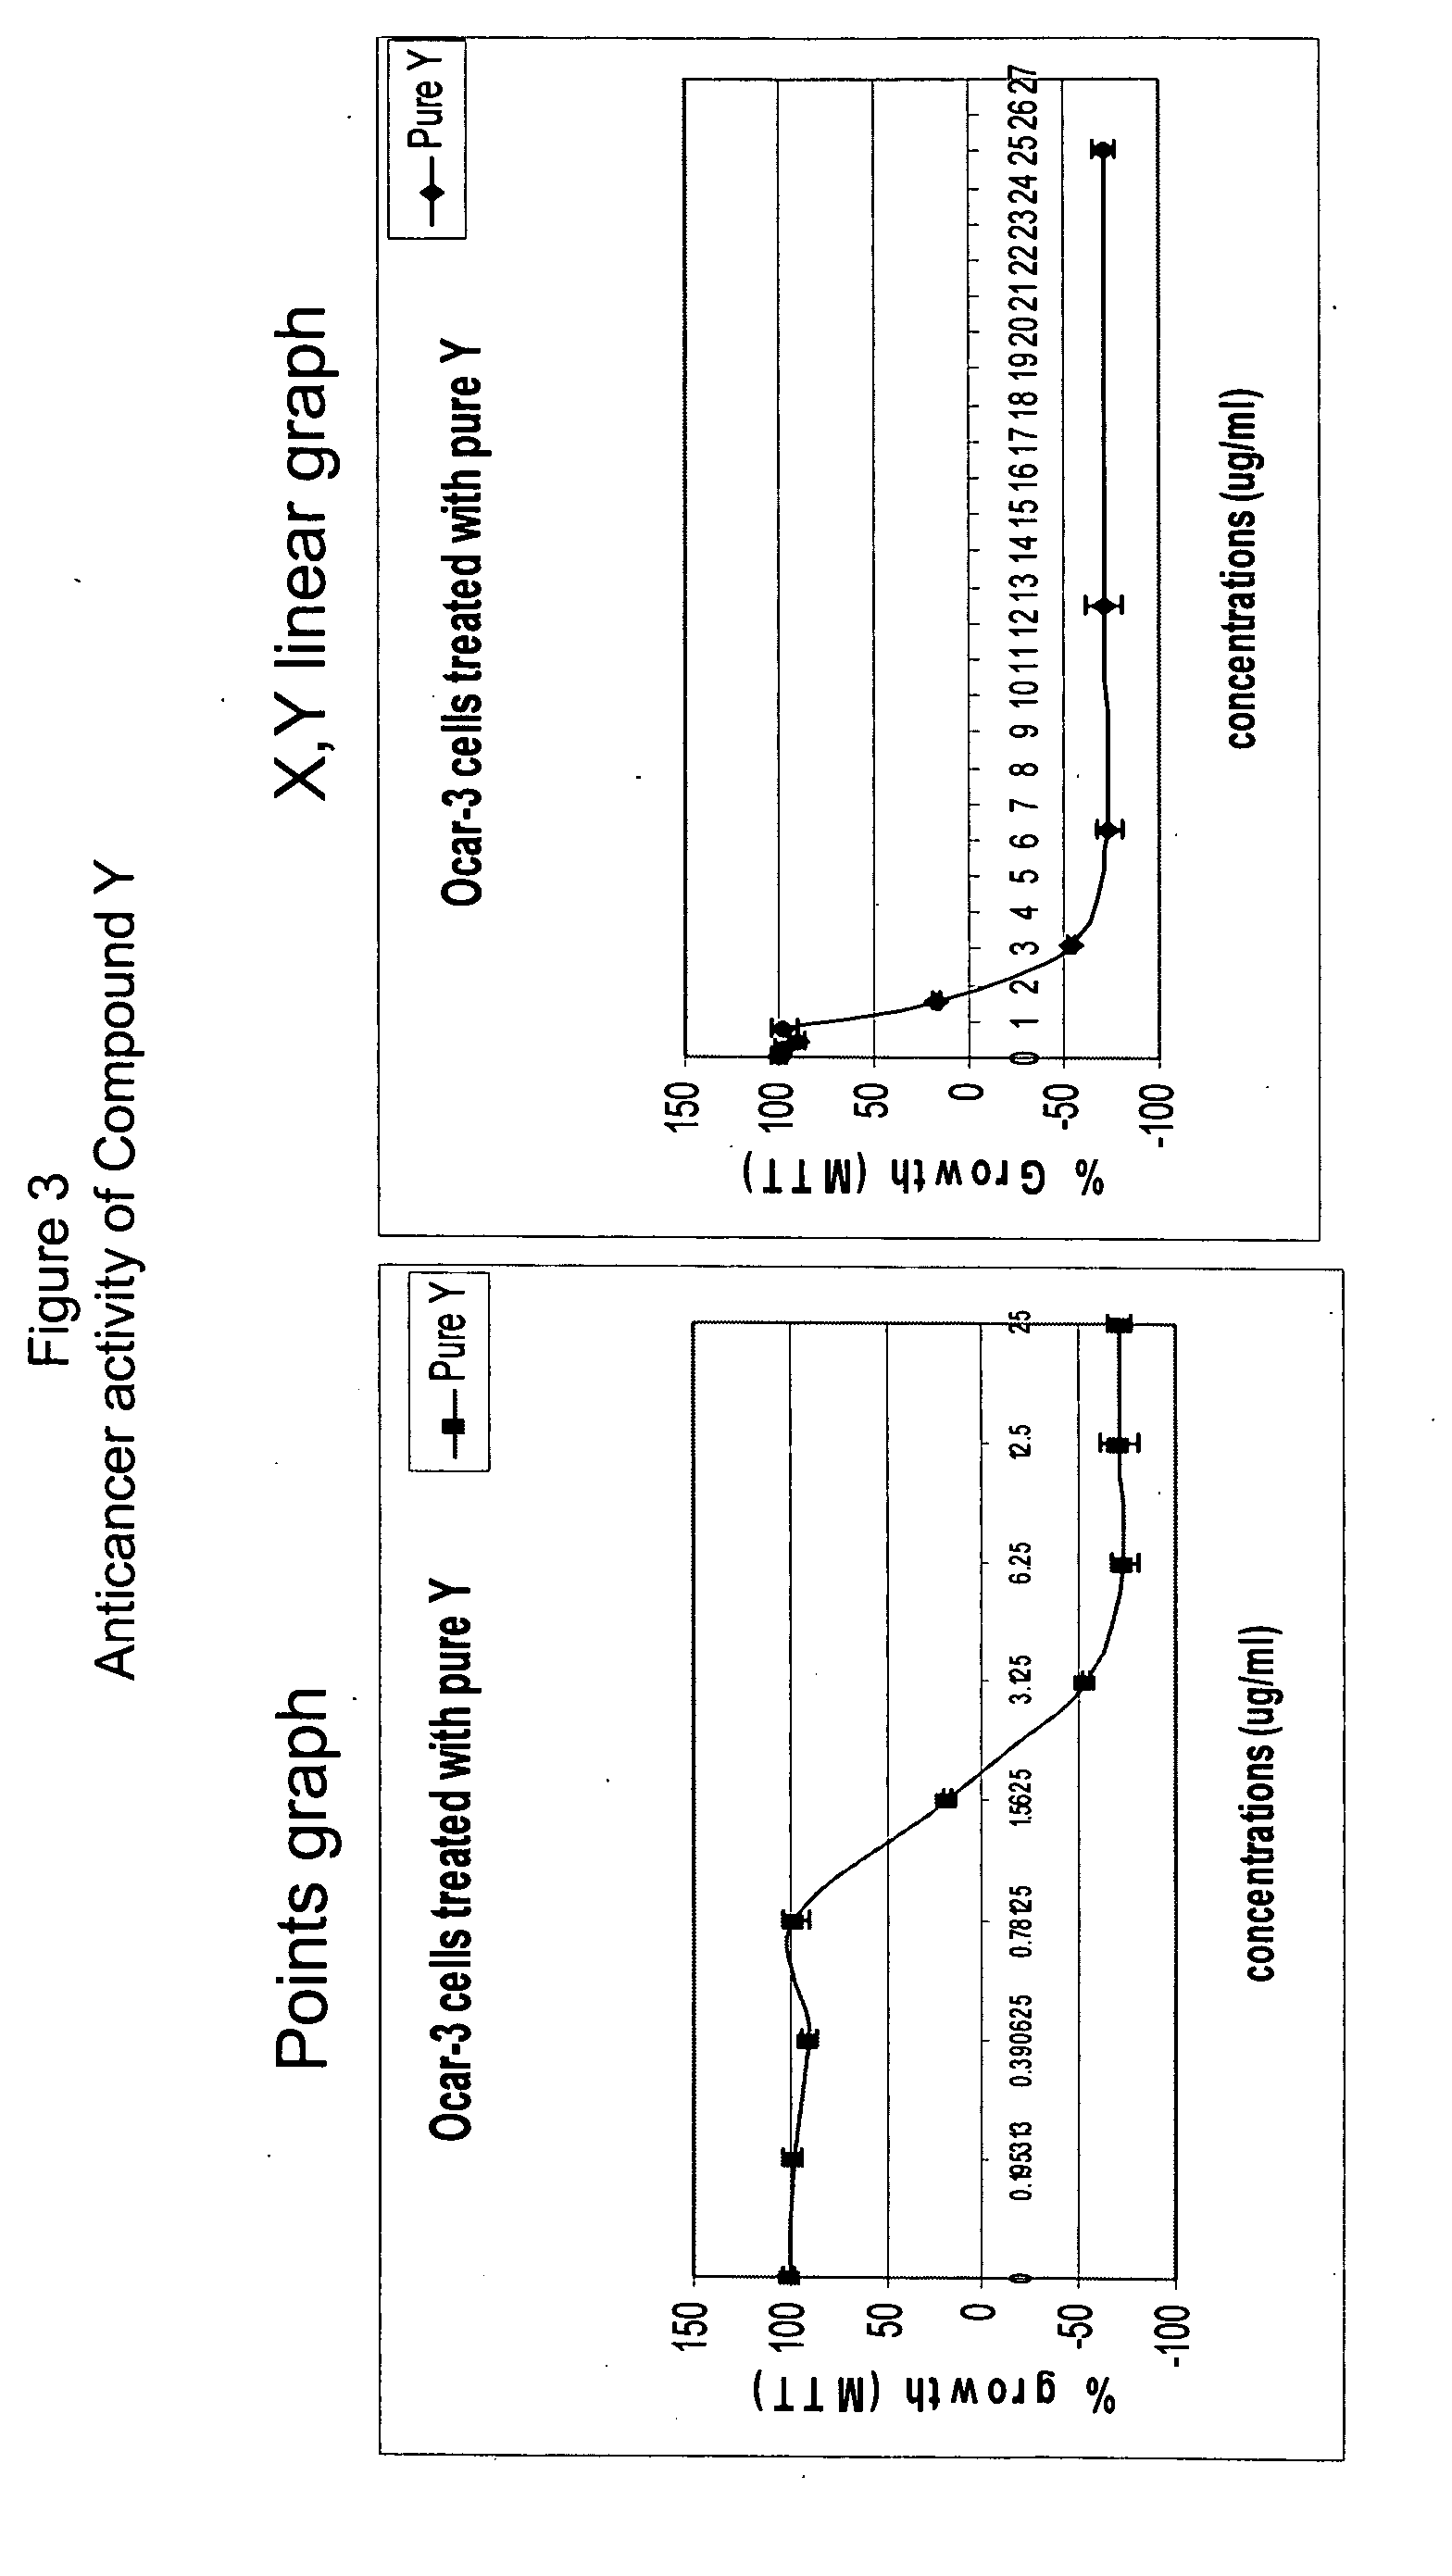 Composition comprising Xanthoceras sorbifolia extracts, compounds isolated from same, methods for preparing same and uses thereof